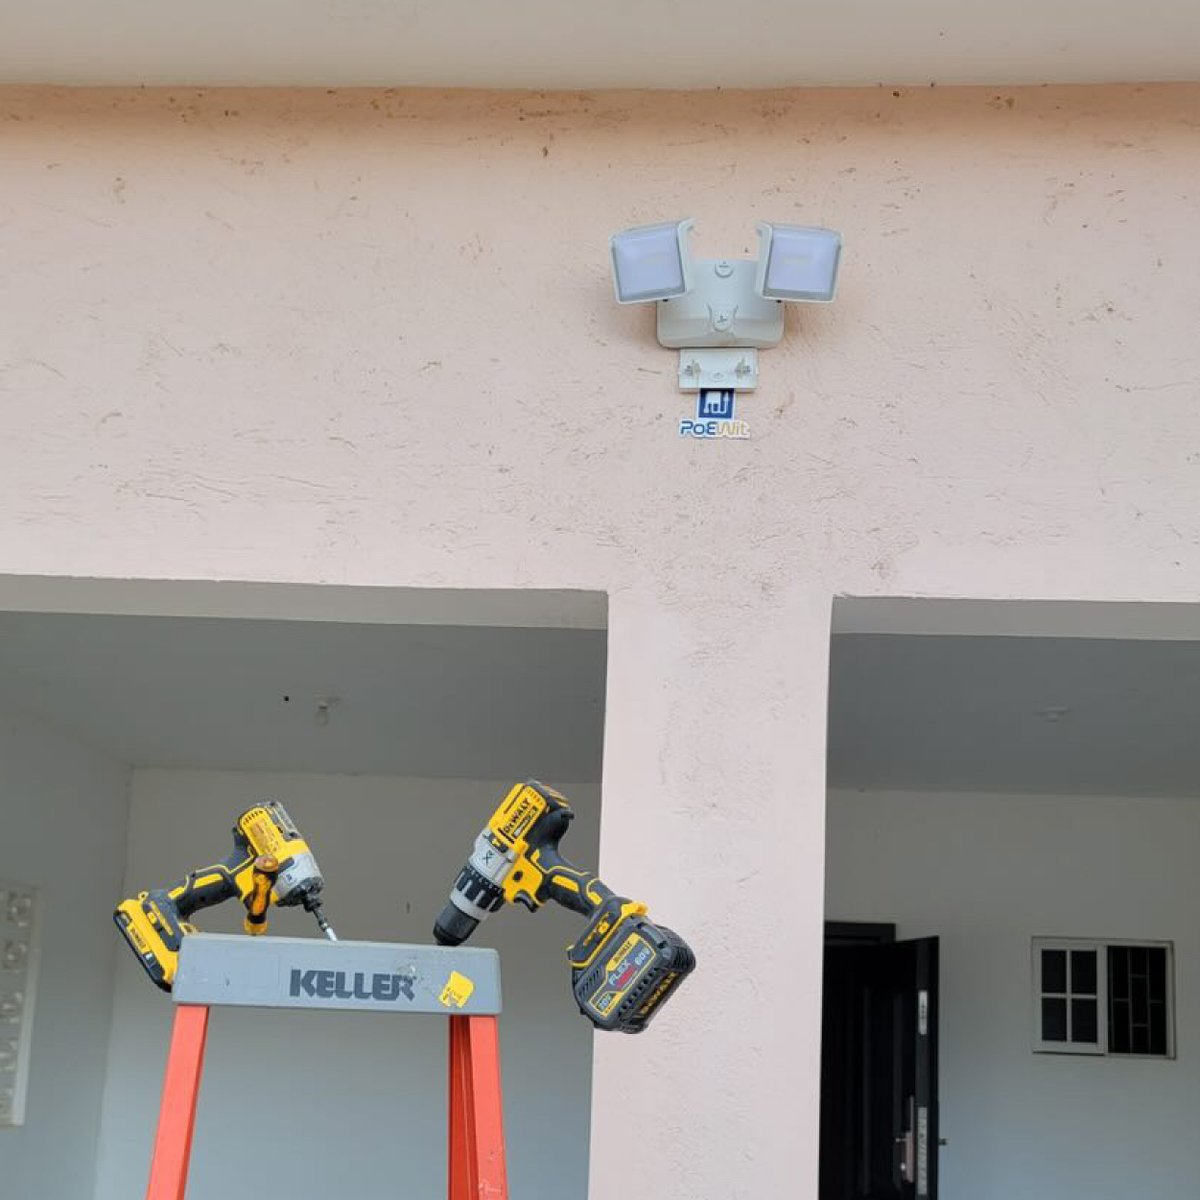 We want our dealers' feedback! How would you install the OS-1-PT security light and why? Here we have 2 different installations by 2 different dealers. In stock and ship from Fort Lauderdale, FL #poewit #homeautomation #lowvoltagelighting #lowvoltagetechnician